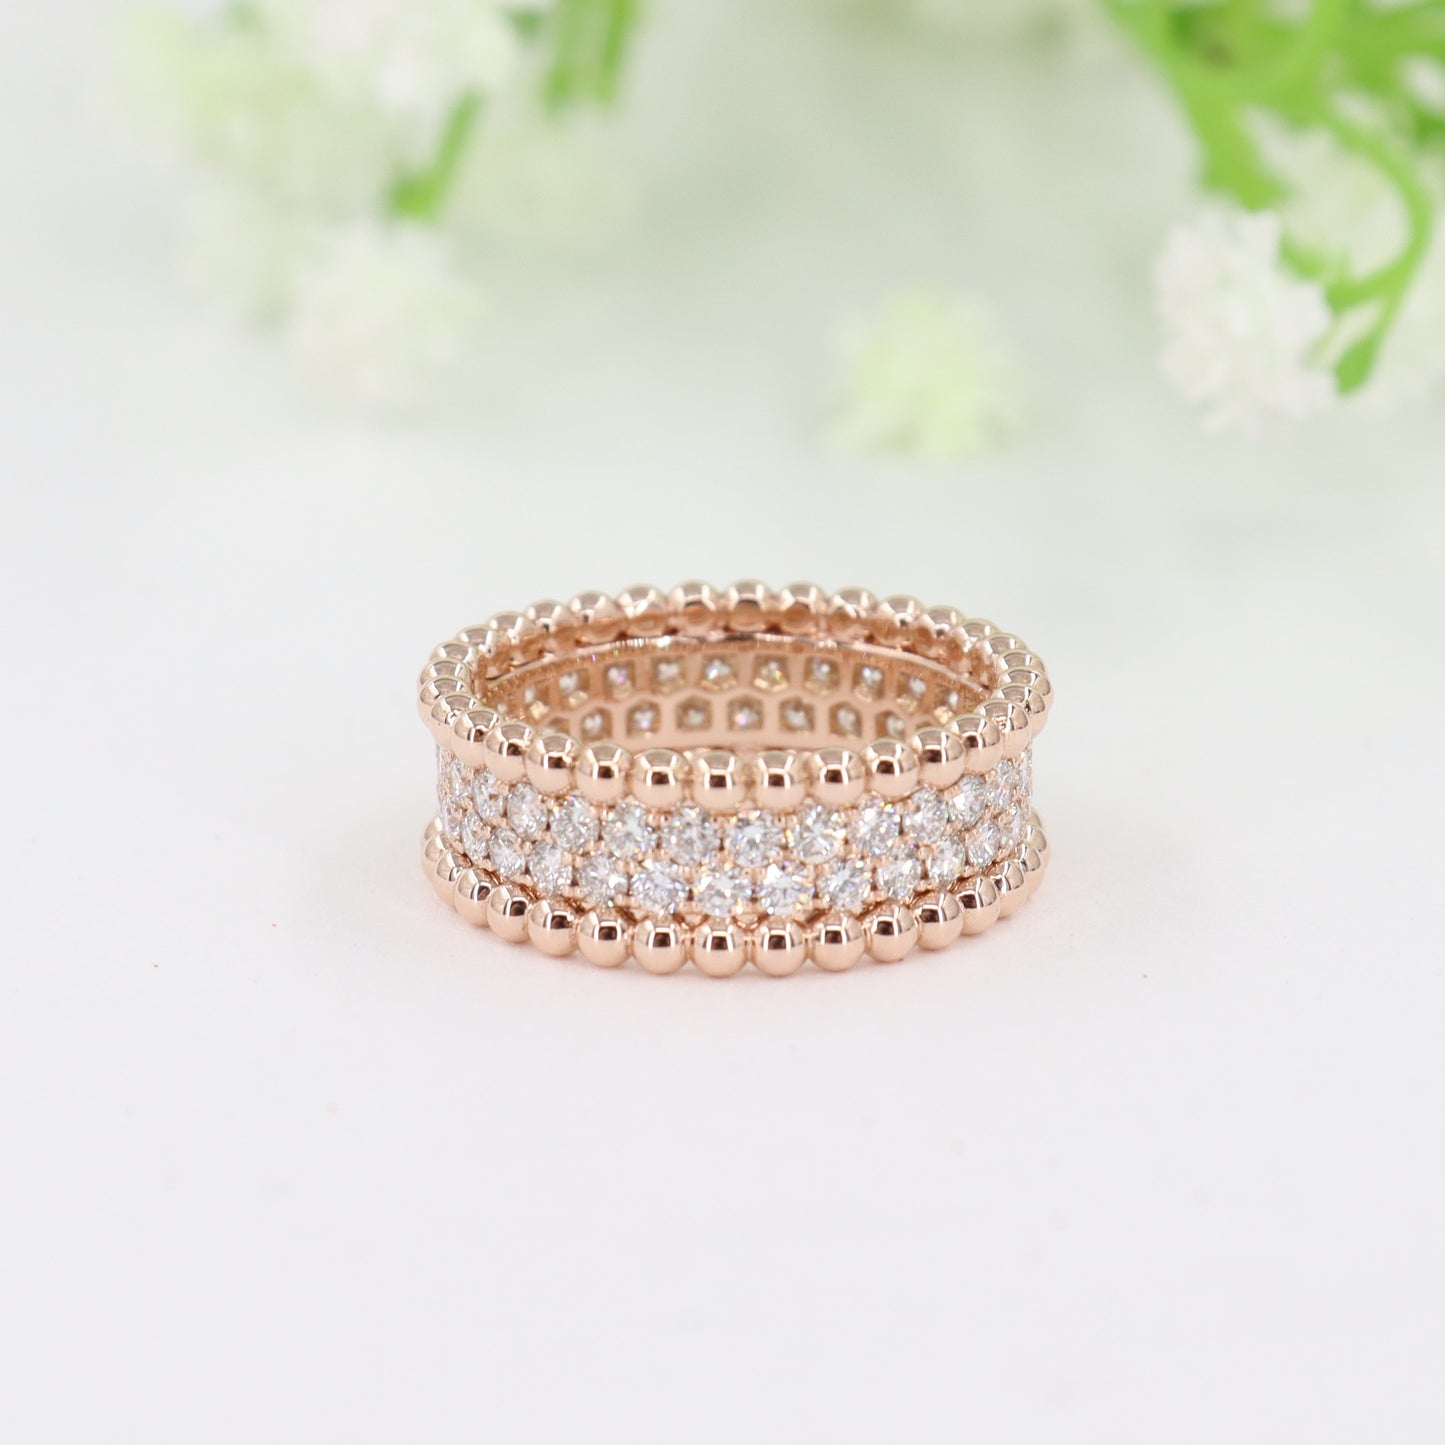 Round Diamond Double Row Eternity Ring/ 14K gold Unique Wedding Band/ Double Bead Ring/ Delicate Antique Anniversary Diamond ring/ Gift for her